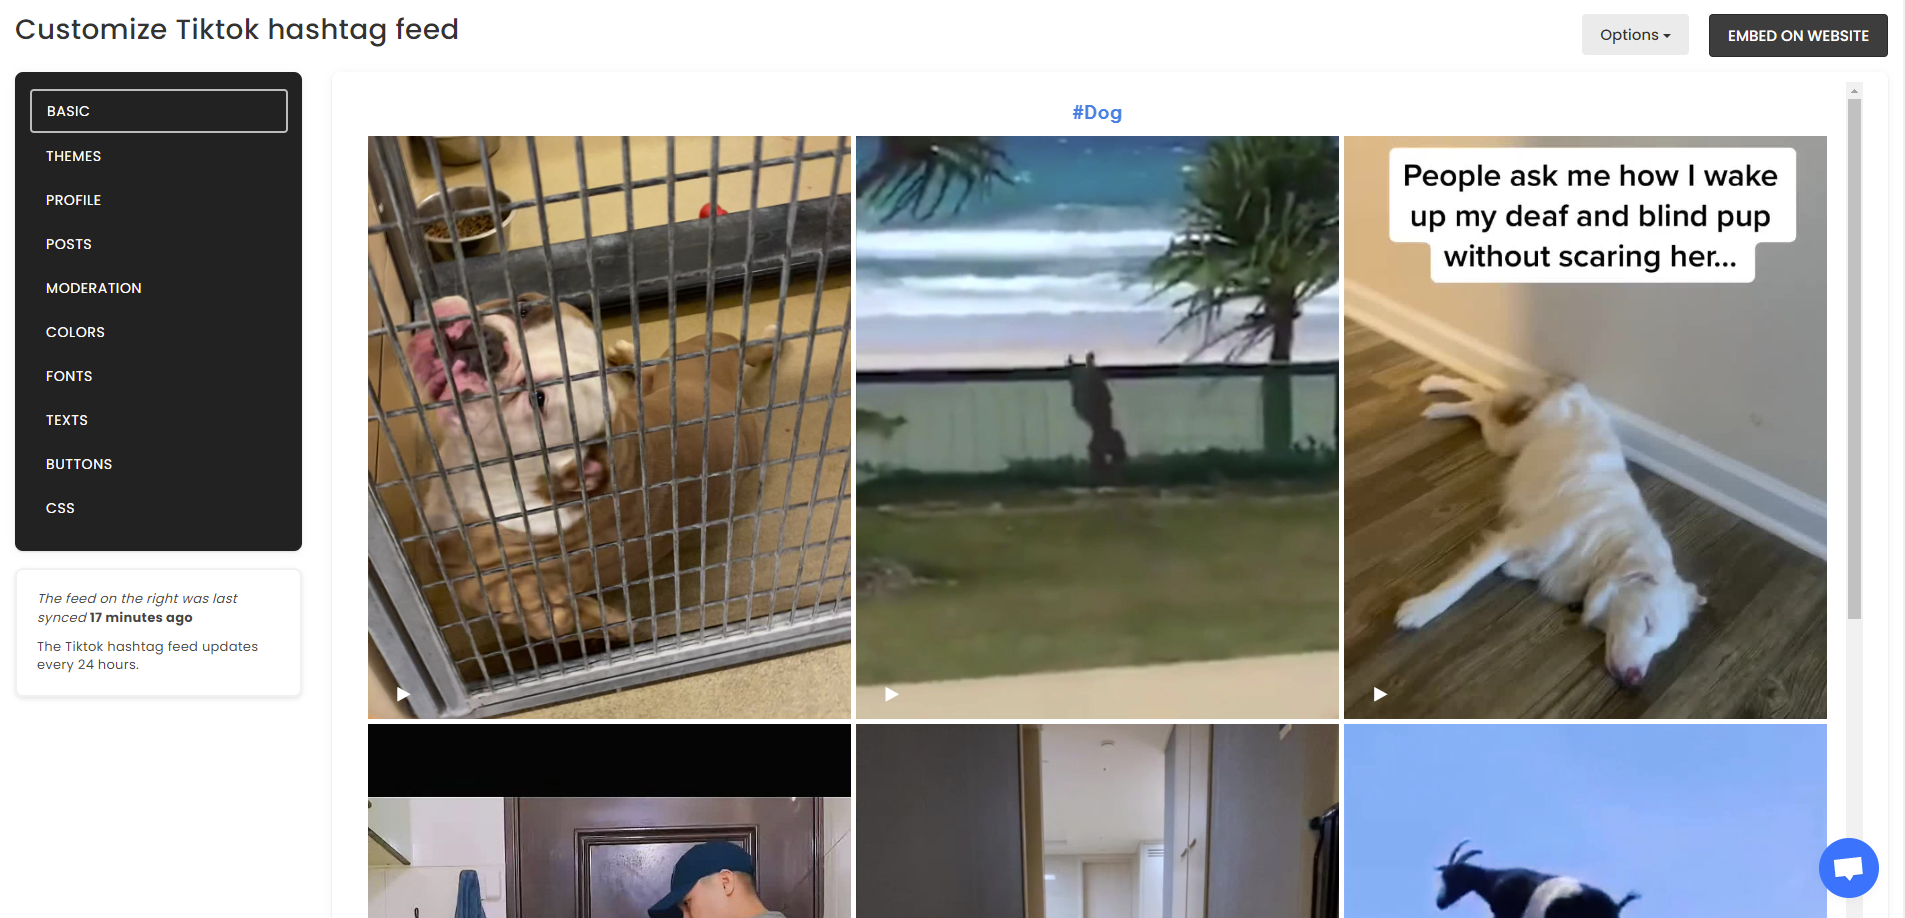 Customize your feed - Free Tiktok Hashtag Feed Widget For Weebly Website